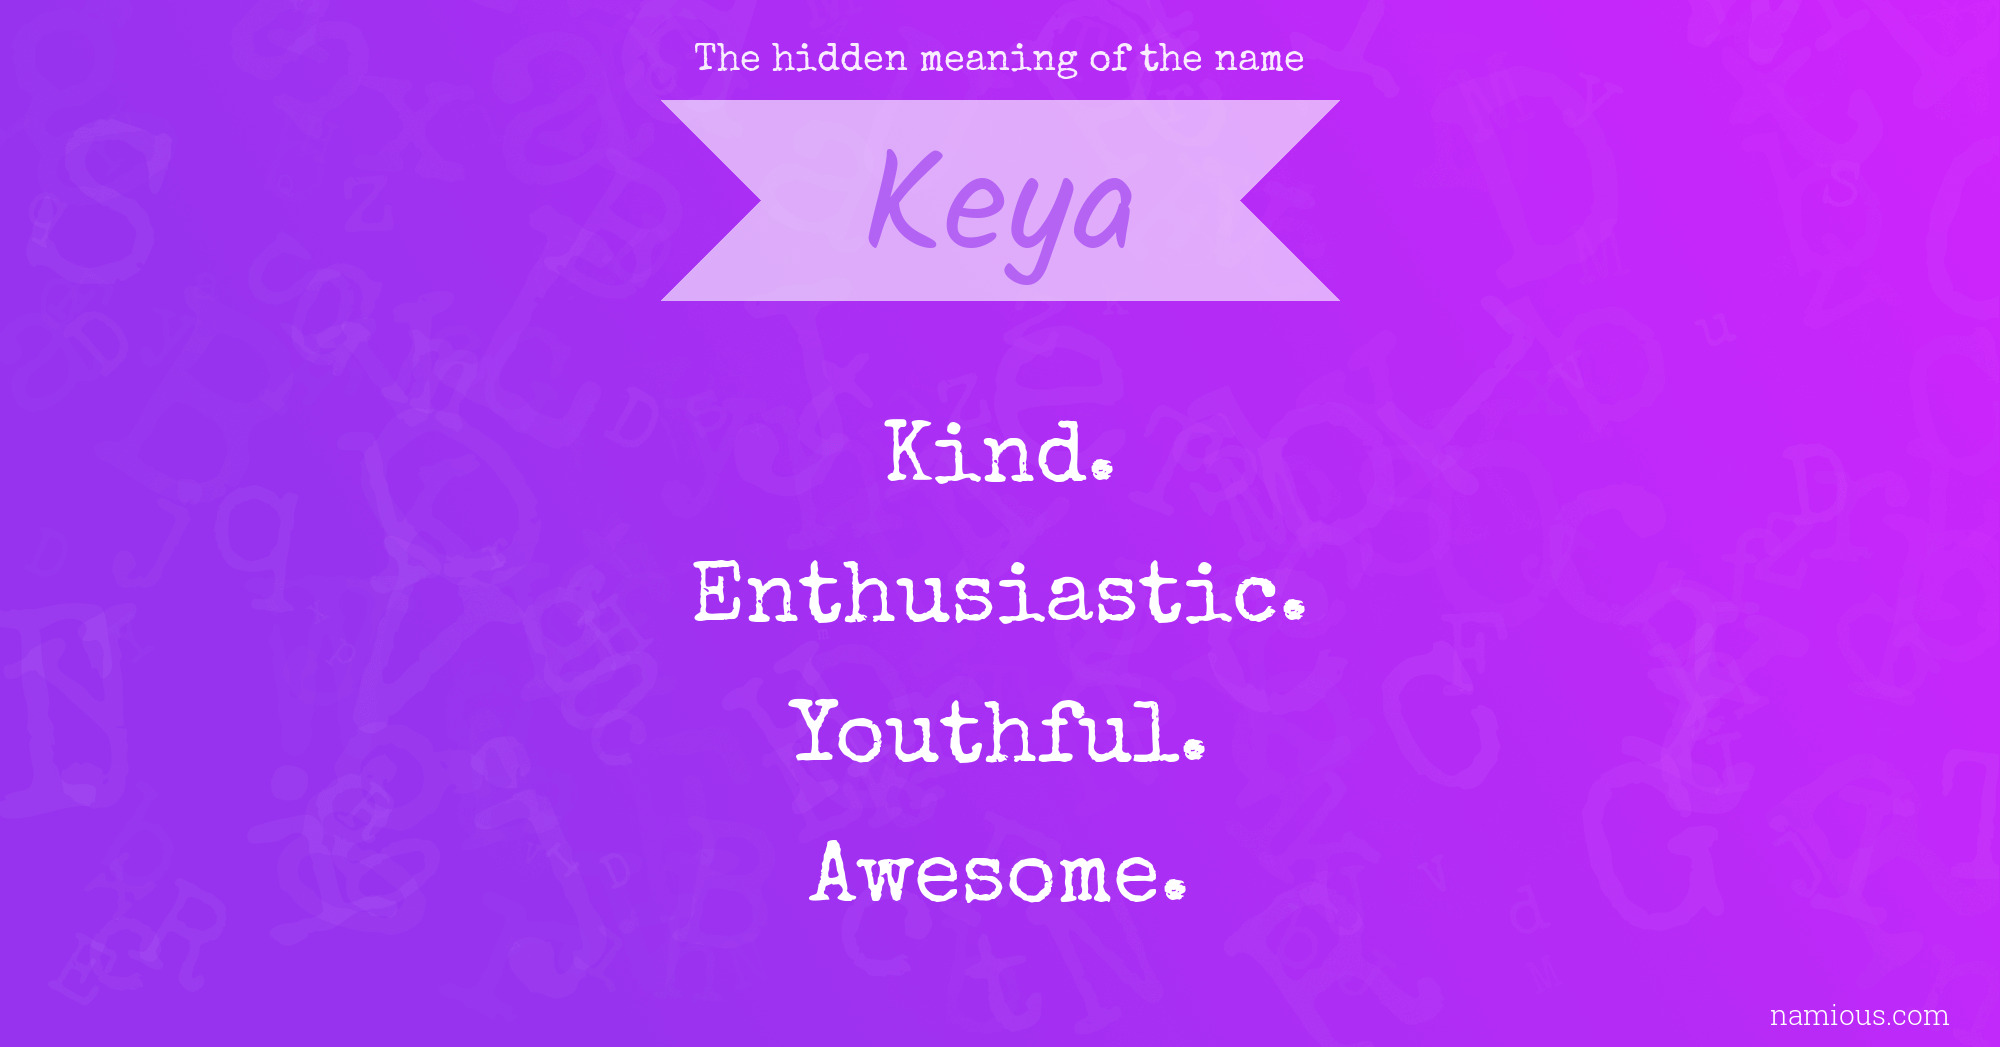 The hidden meaning of the name Keya